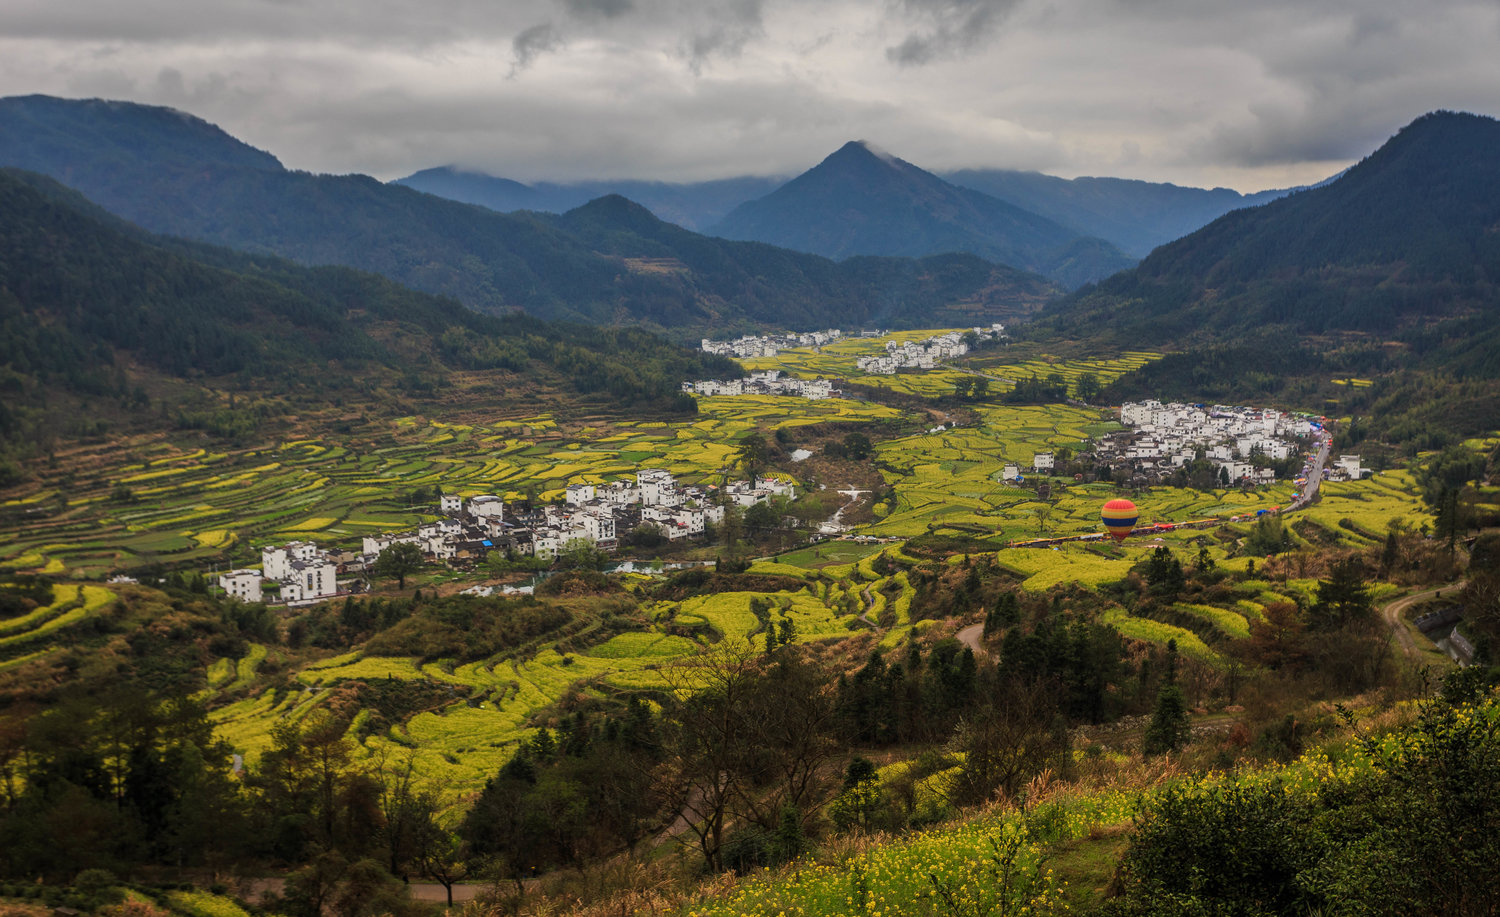 “Wuyuan: Possibly the Most beautiful countryside”的图片搜索结果